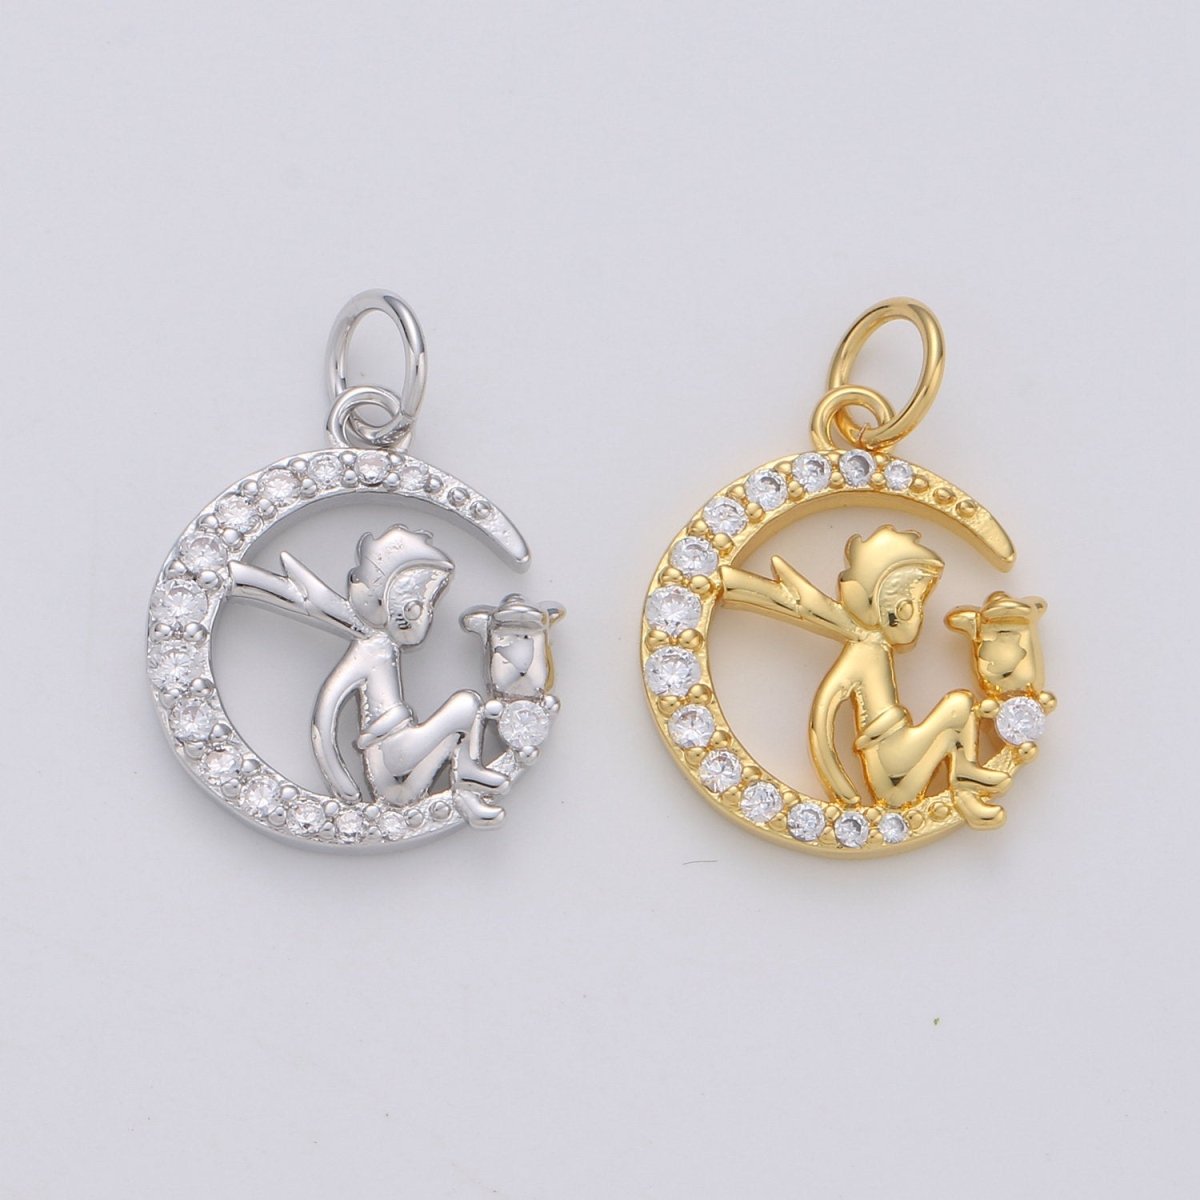 Dainty Gold Fairy Moon Charms Micro Pave Charm Fantasy Jewelry for Bracelet Necklace Charm D-123 - DLUXCA